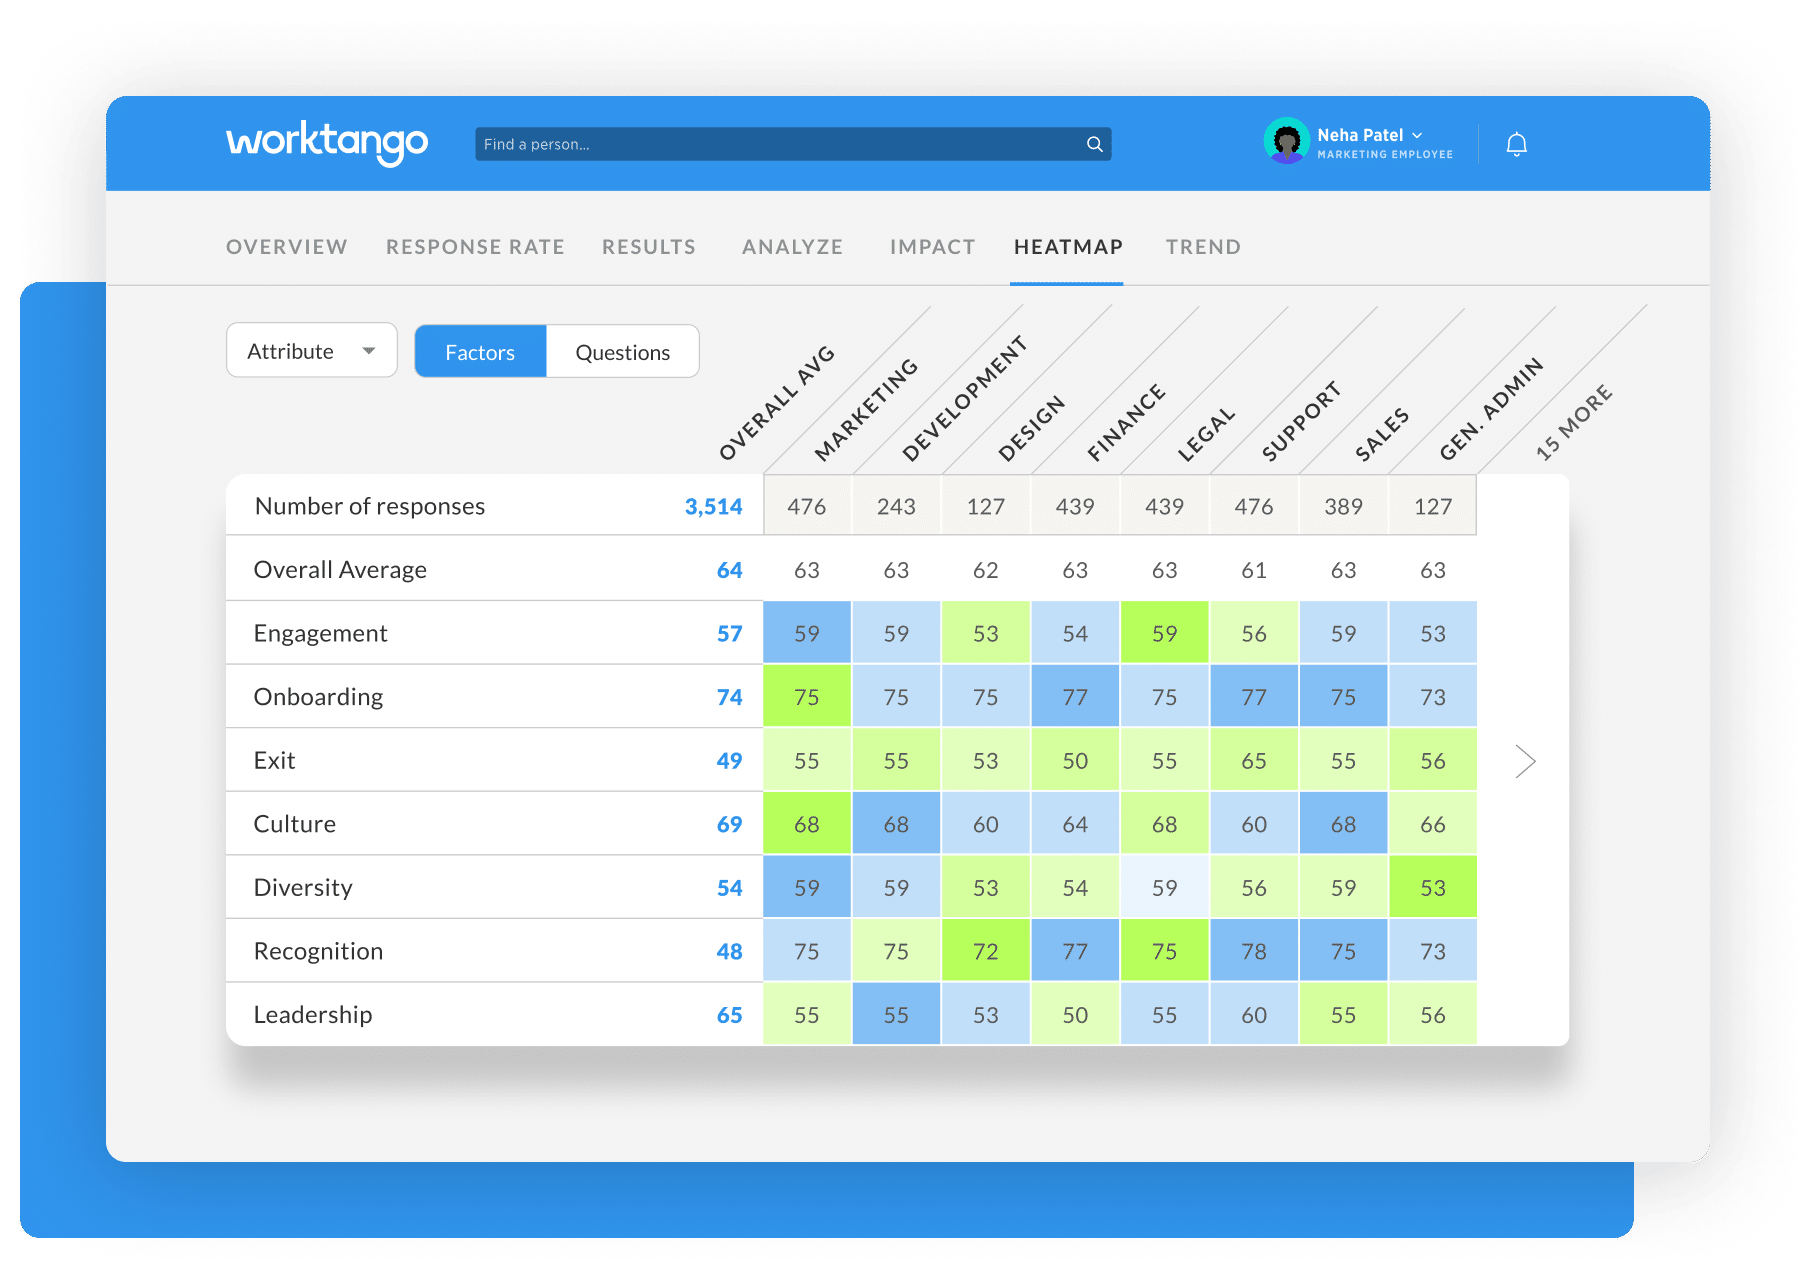 Heatmap from WorkTango's Employee Surveys & Insights tool to support analyzing survey data and identifying trends.